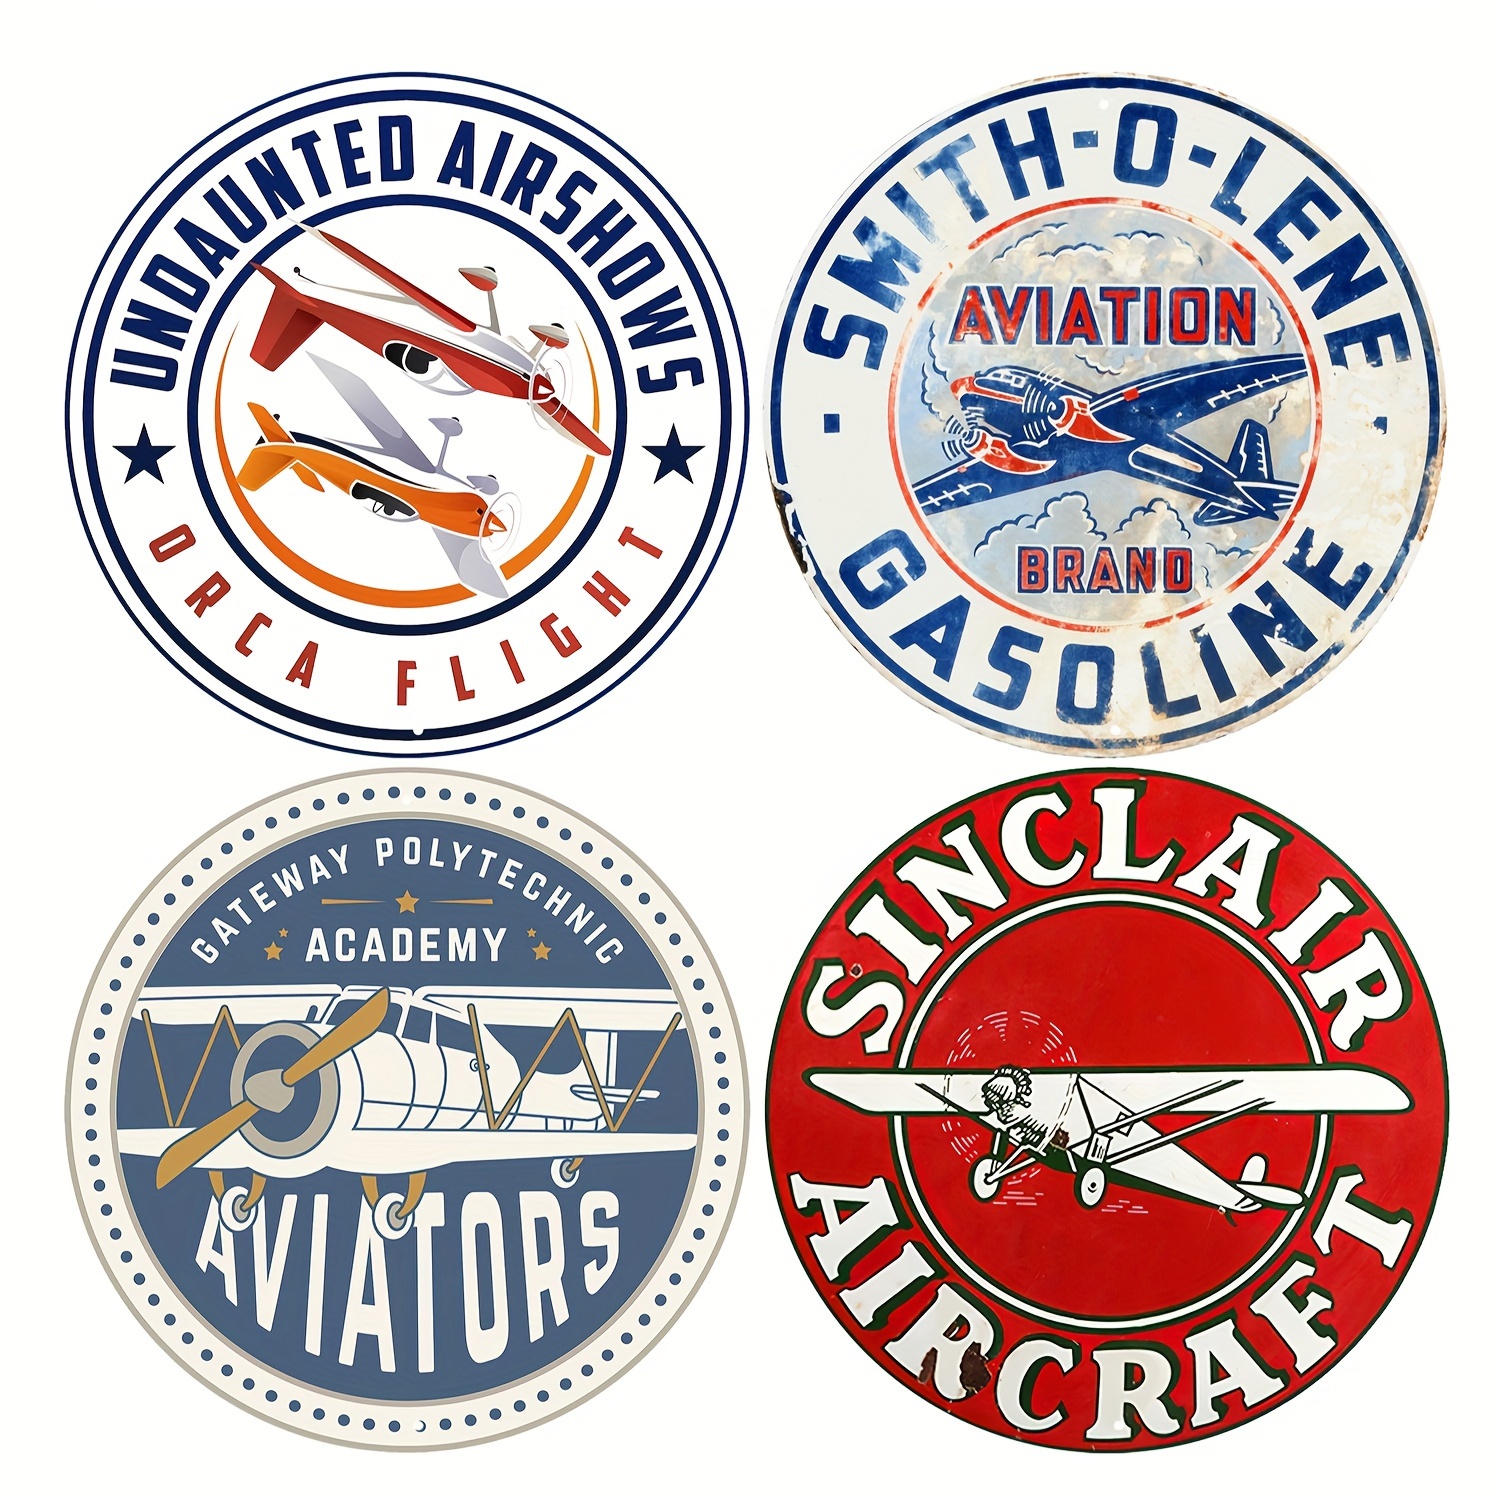 * Flashing Airplane Metal Brooch Creative Aircraft Badge Pin Clothing  Accessories Gift For Girls